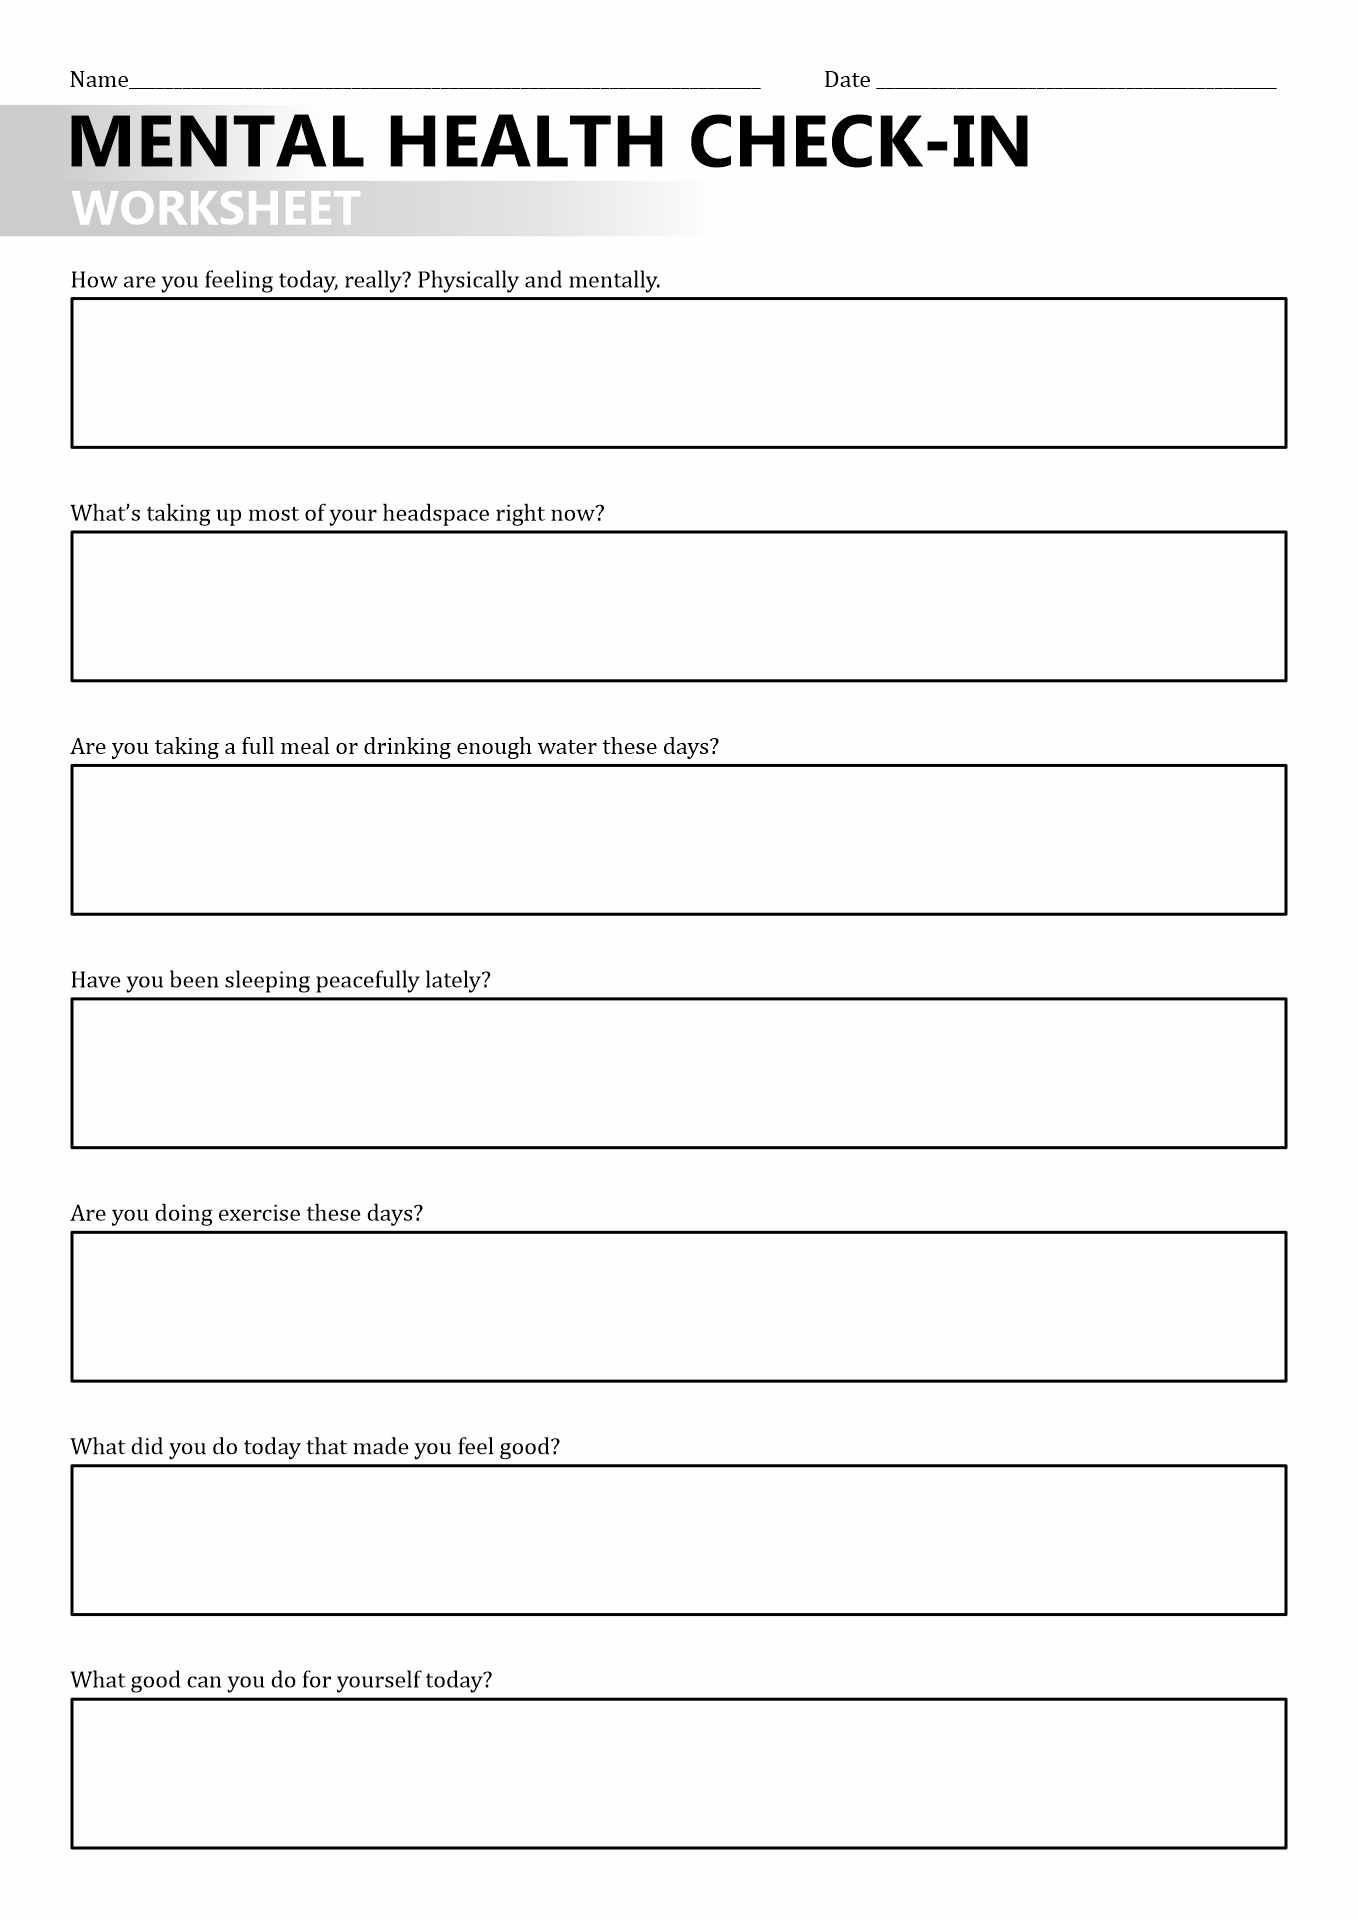 16-best-images-of-recovery-support-worksheet-early-recovery-skills-worksheets-relapse